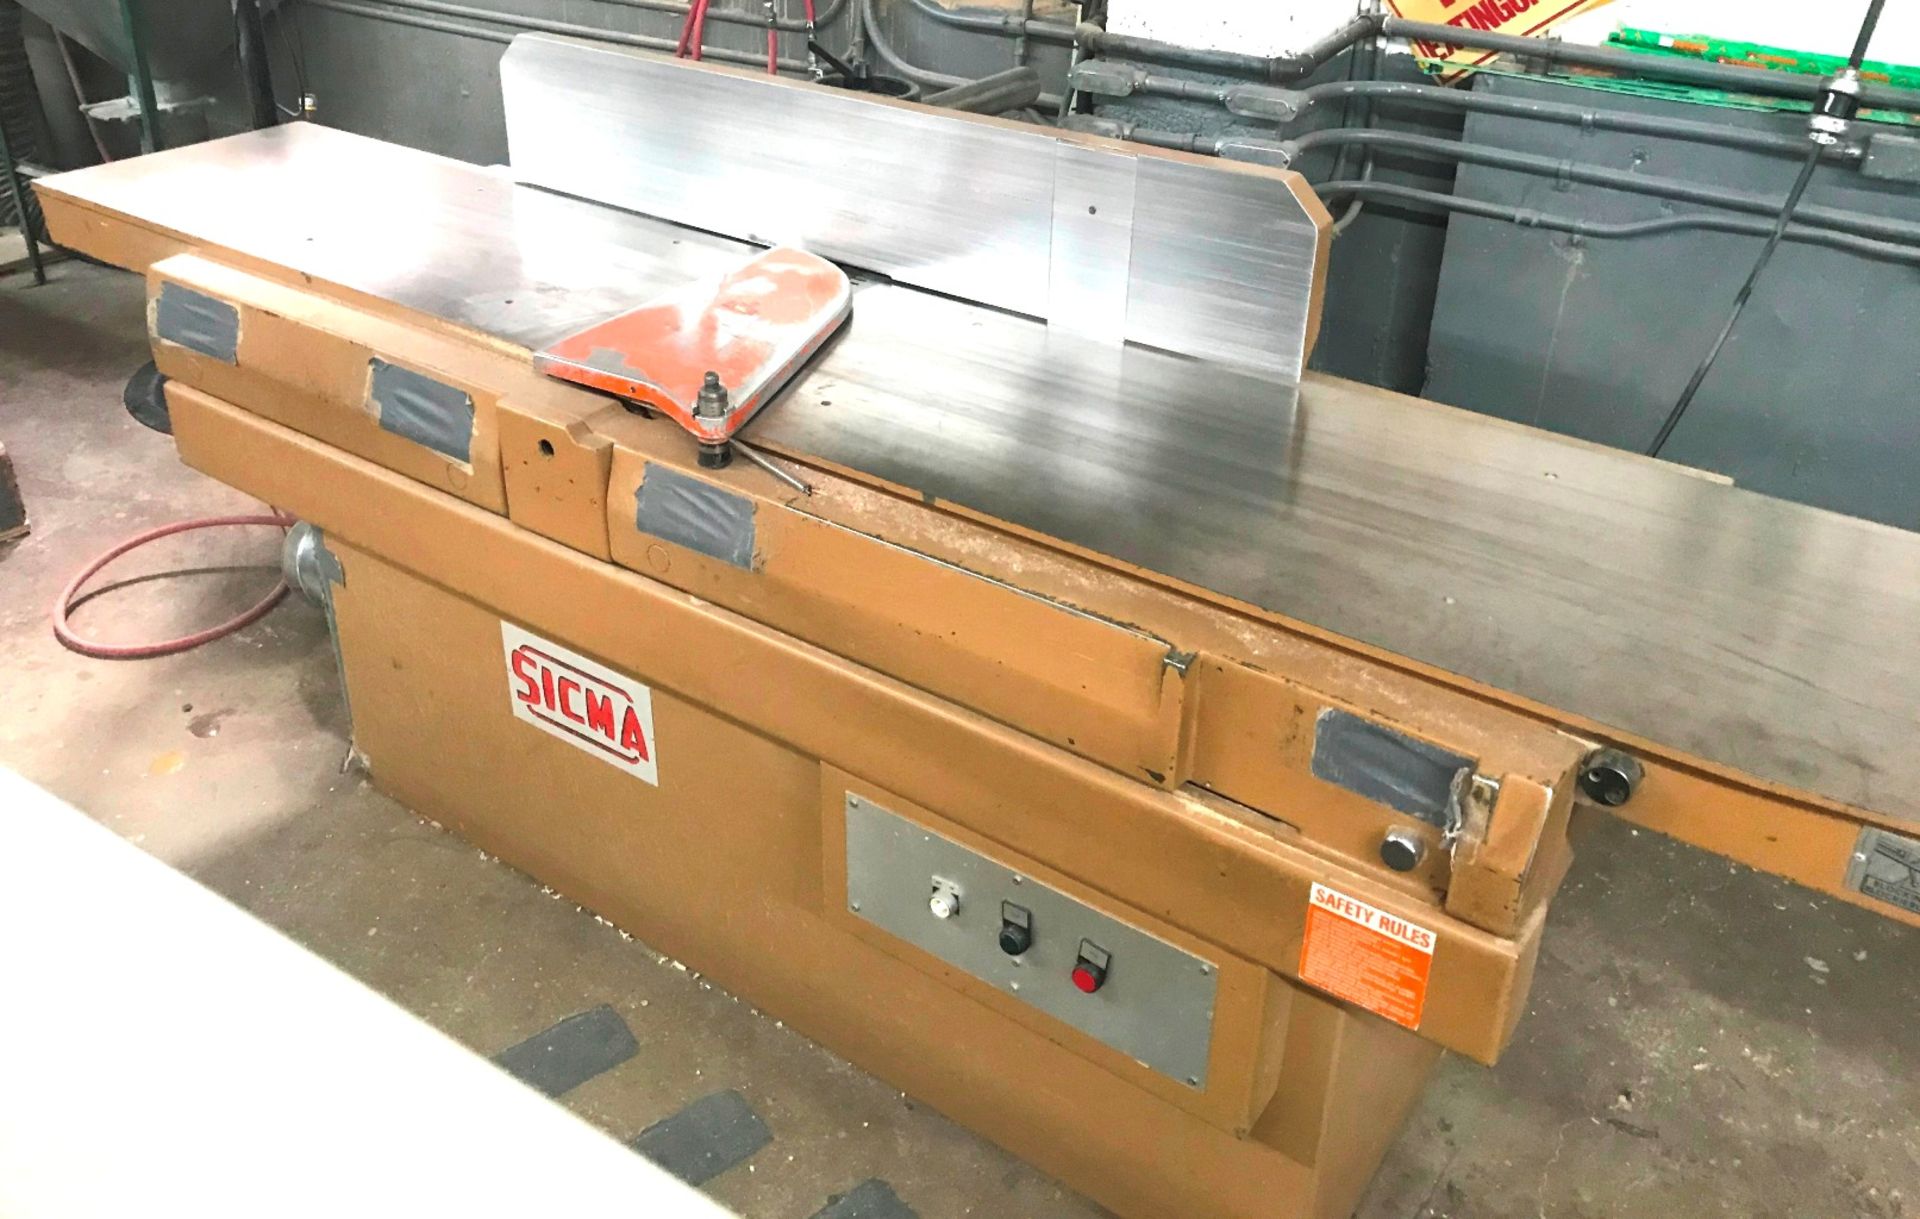 Sicma Mod.DT430 17" Wood Jointer - S/N 4030989, 98" Table Length, 7.5HP, 220/3/60